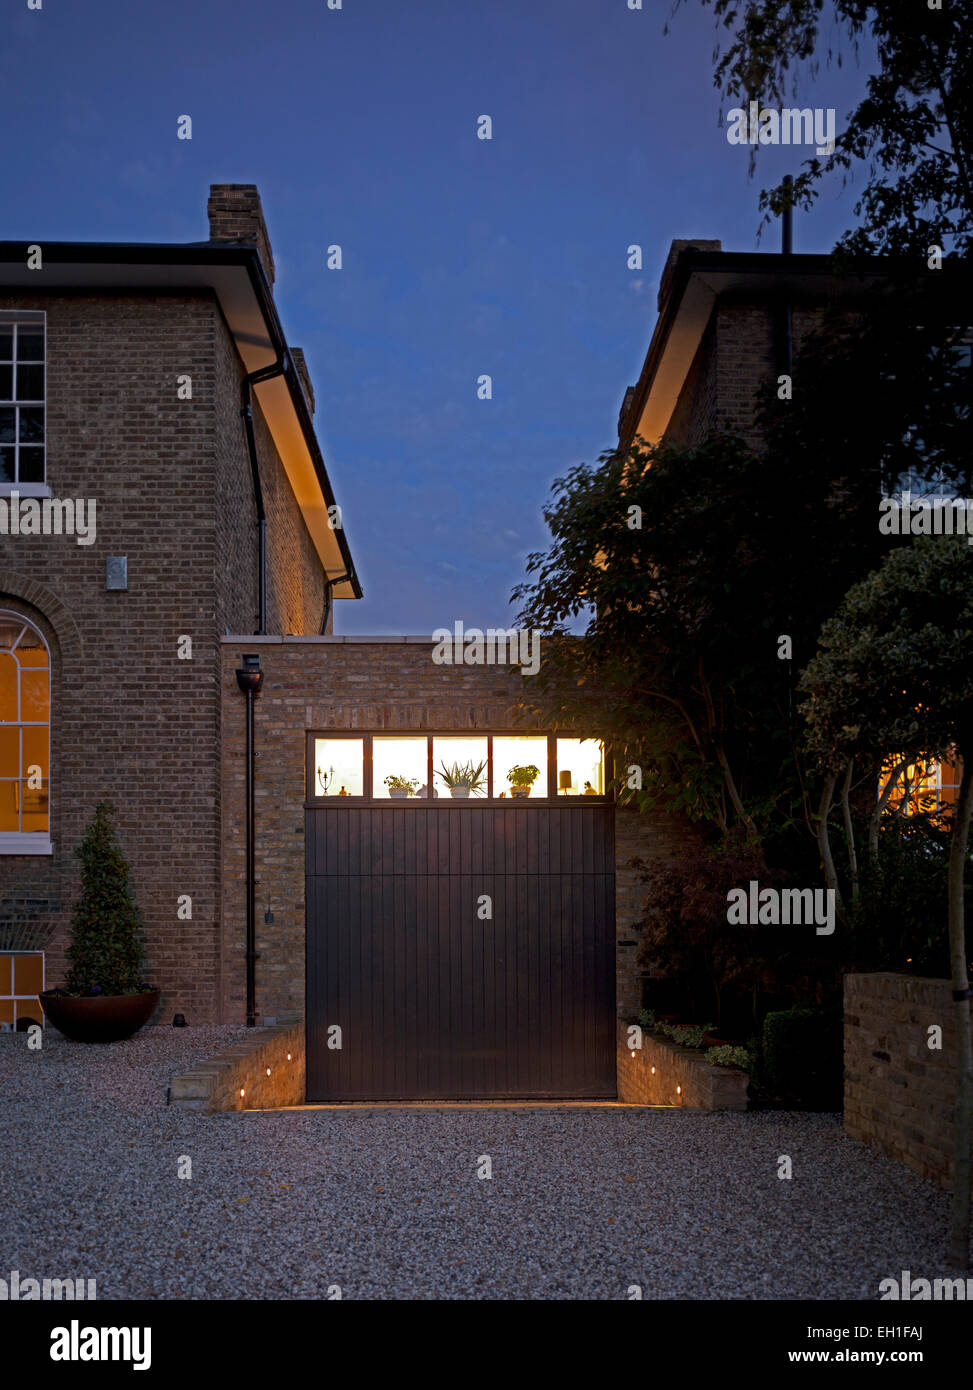 House in Shooters Hill, London, United Kingdom. Architect: Charles Barclay Architects, 2012. Front elevation of Georgian house g Stock Photo